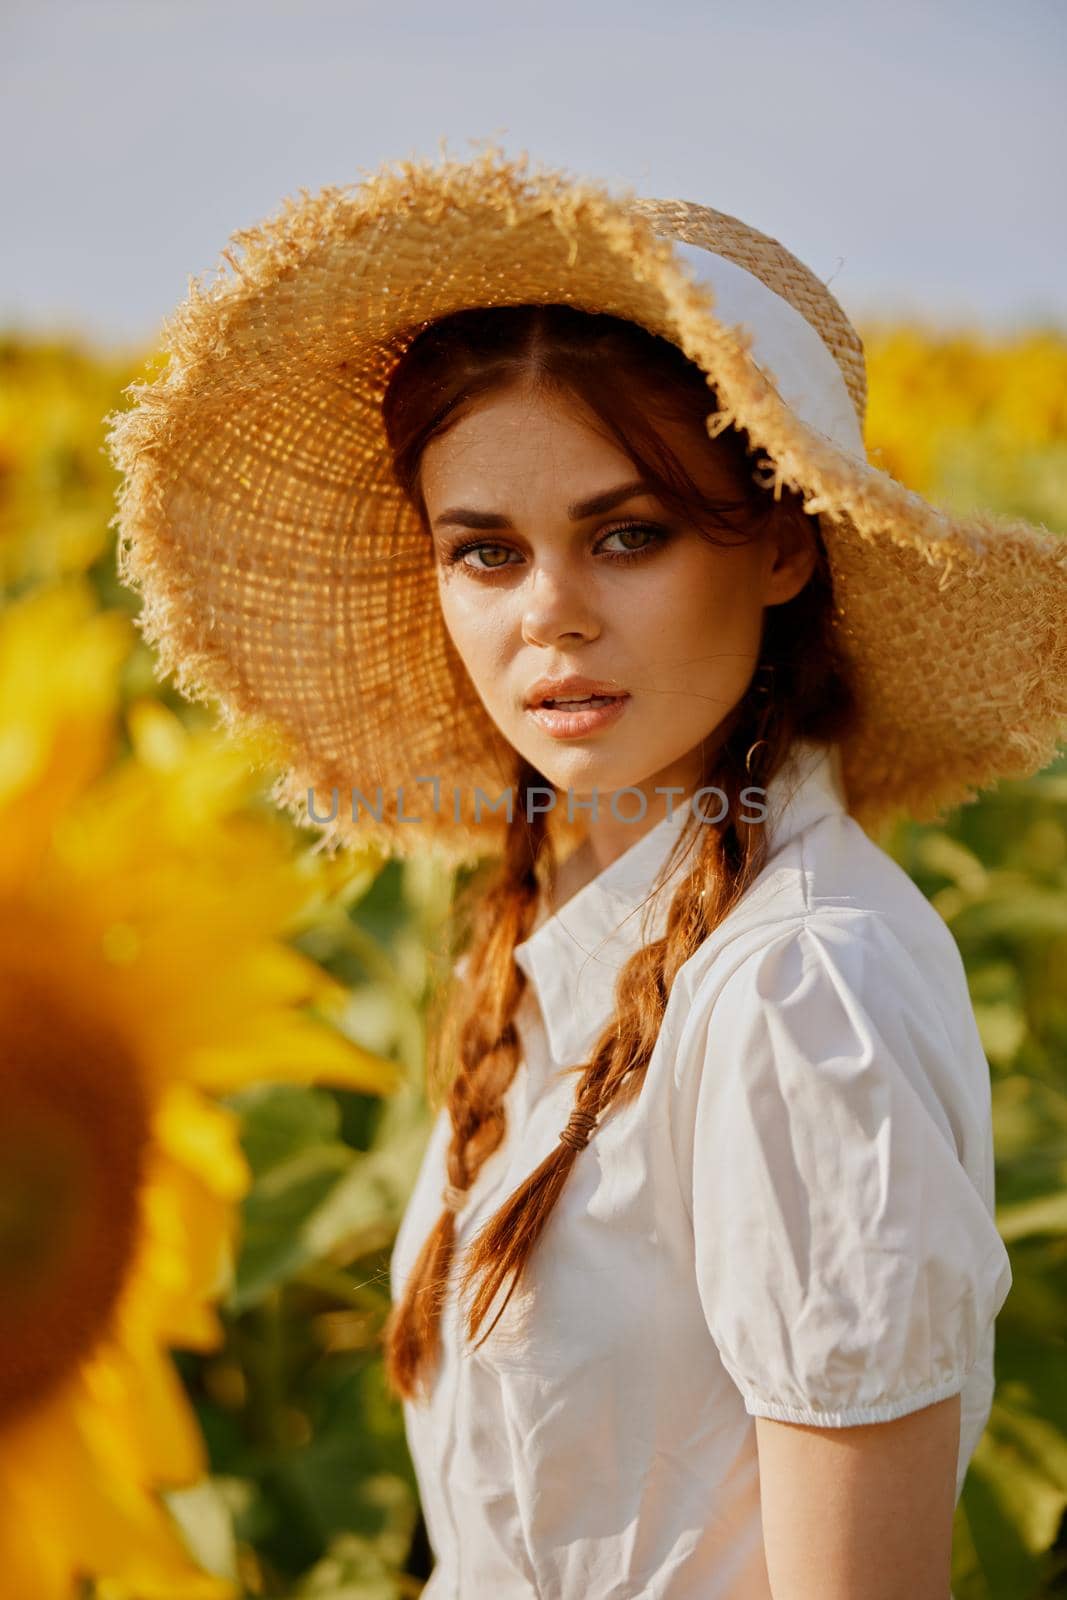 woman with pigtails in a field of sunflowers lifestyle landscape by SHOTPRIME